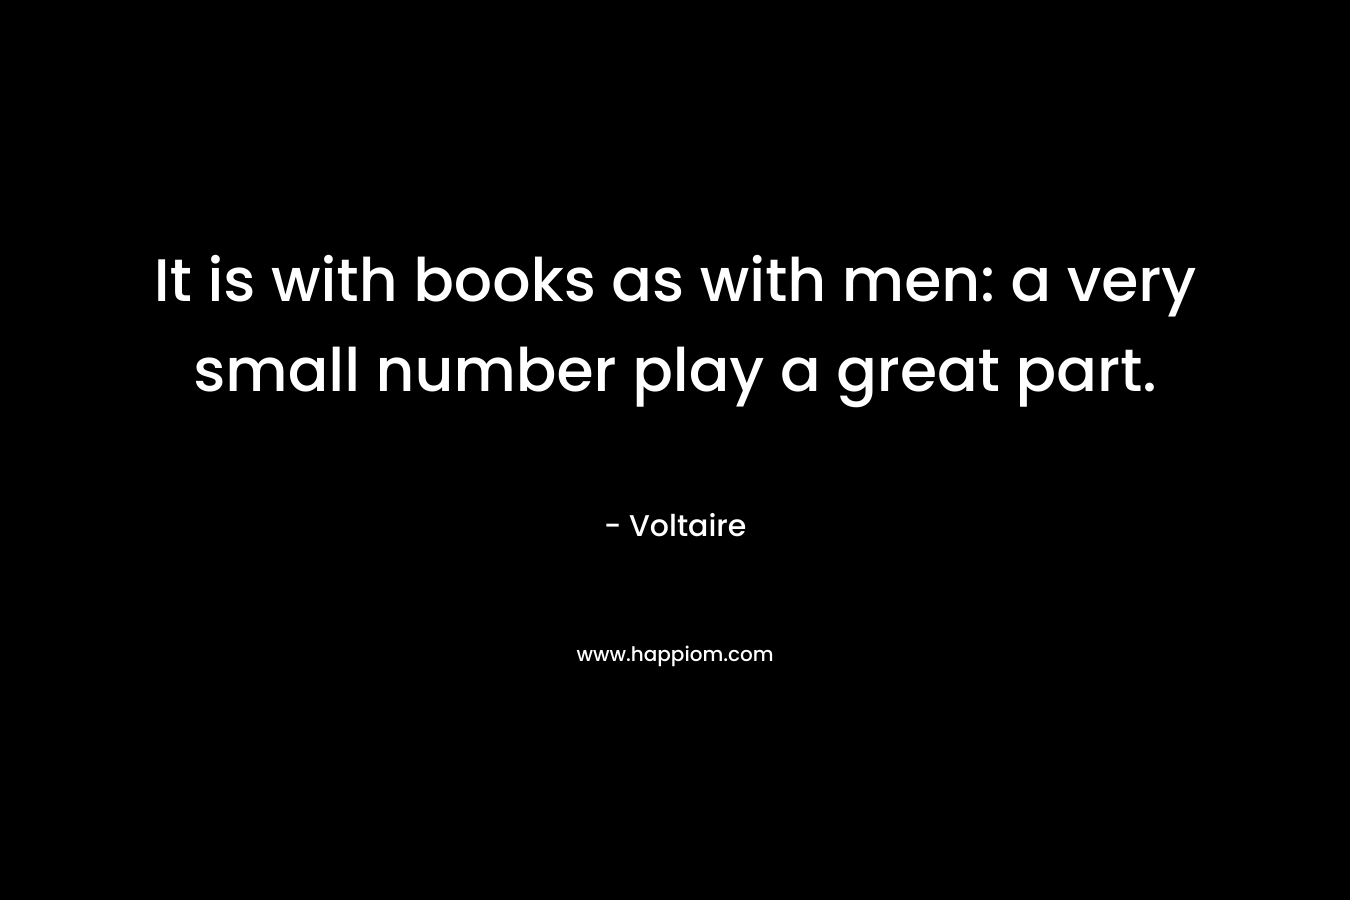 It is with books as with men: a very small number play a great part.